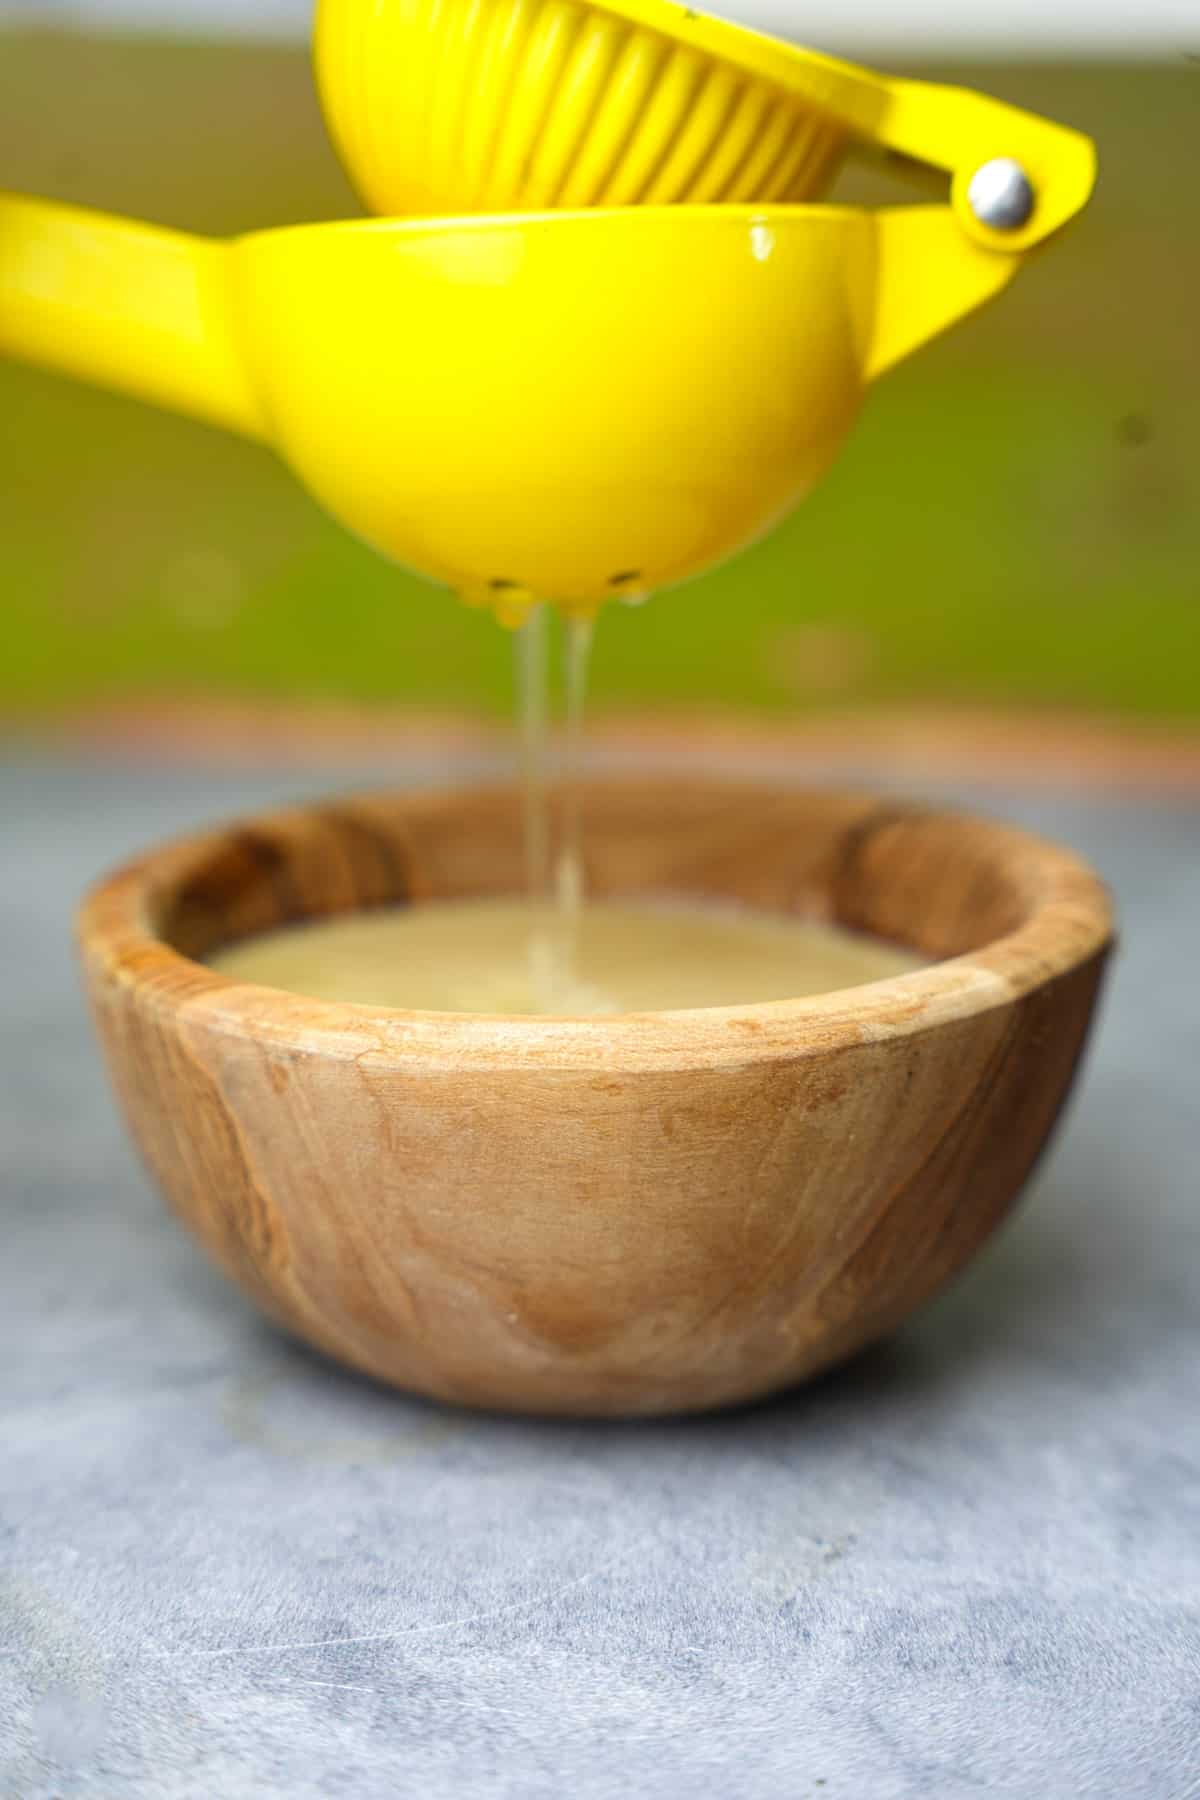 Lemon juice is added to tahini sauce in a wooden bowl.